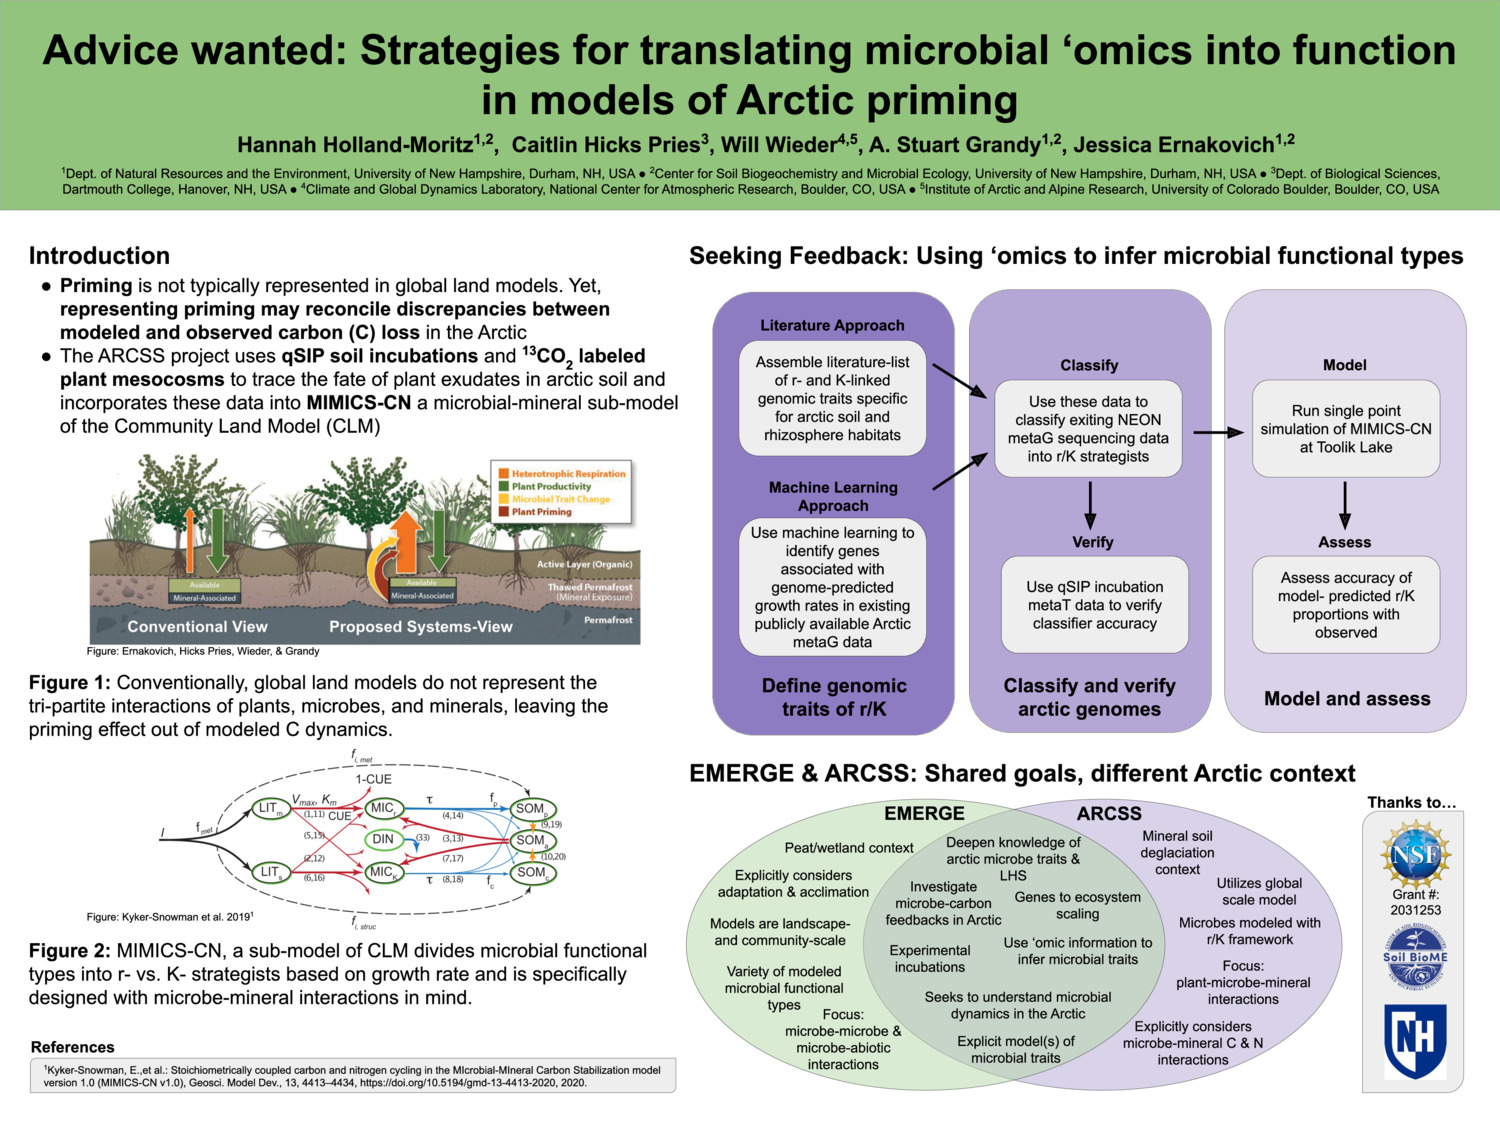 Advice Wanted: Strategies For Translating Microbial 'Omics Into Function In Models Of Arctic Priming by heh1030